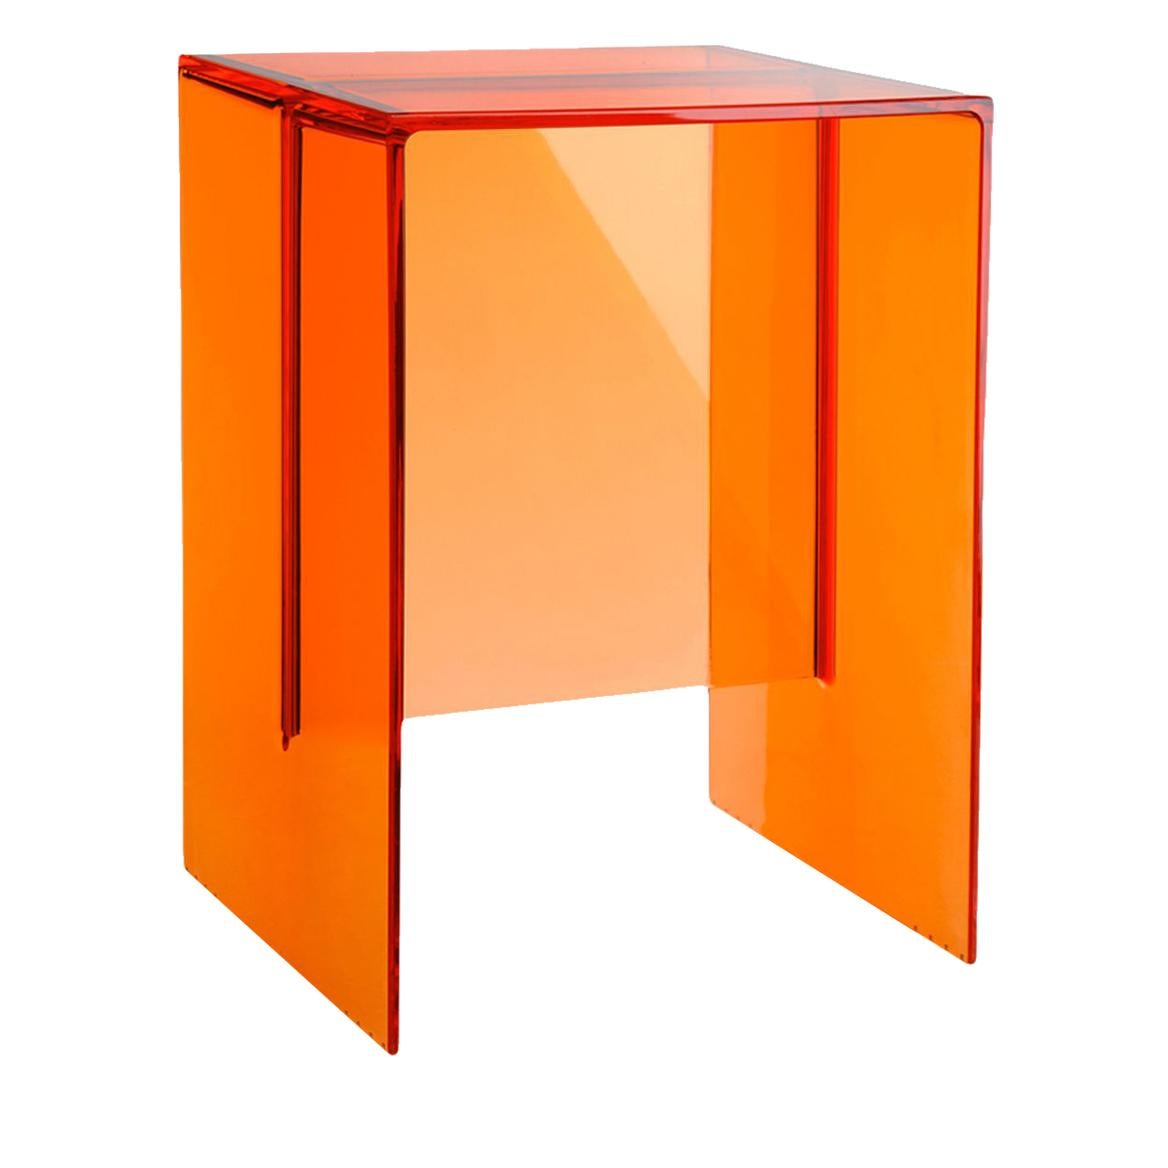 Kartell Max-Beam Side Table in Rust Orange by Ludovica and Roberto Palomba For Sale